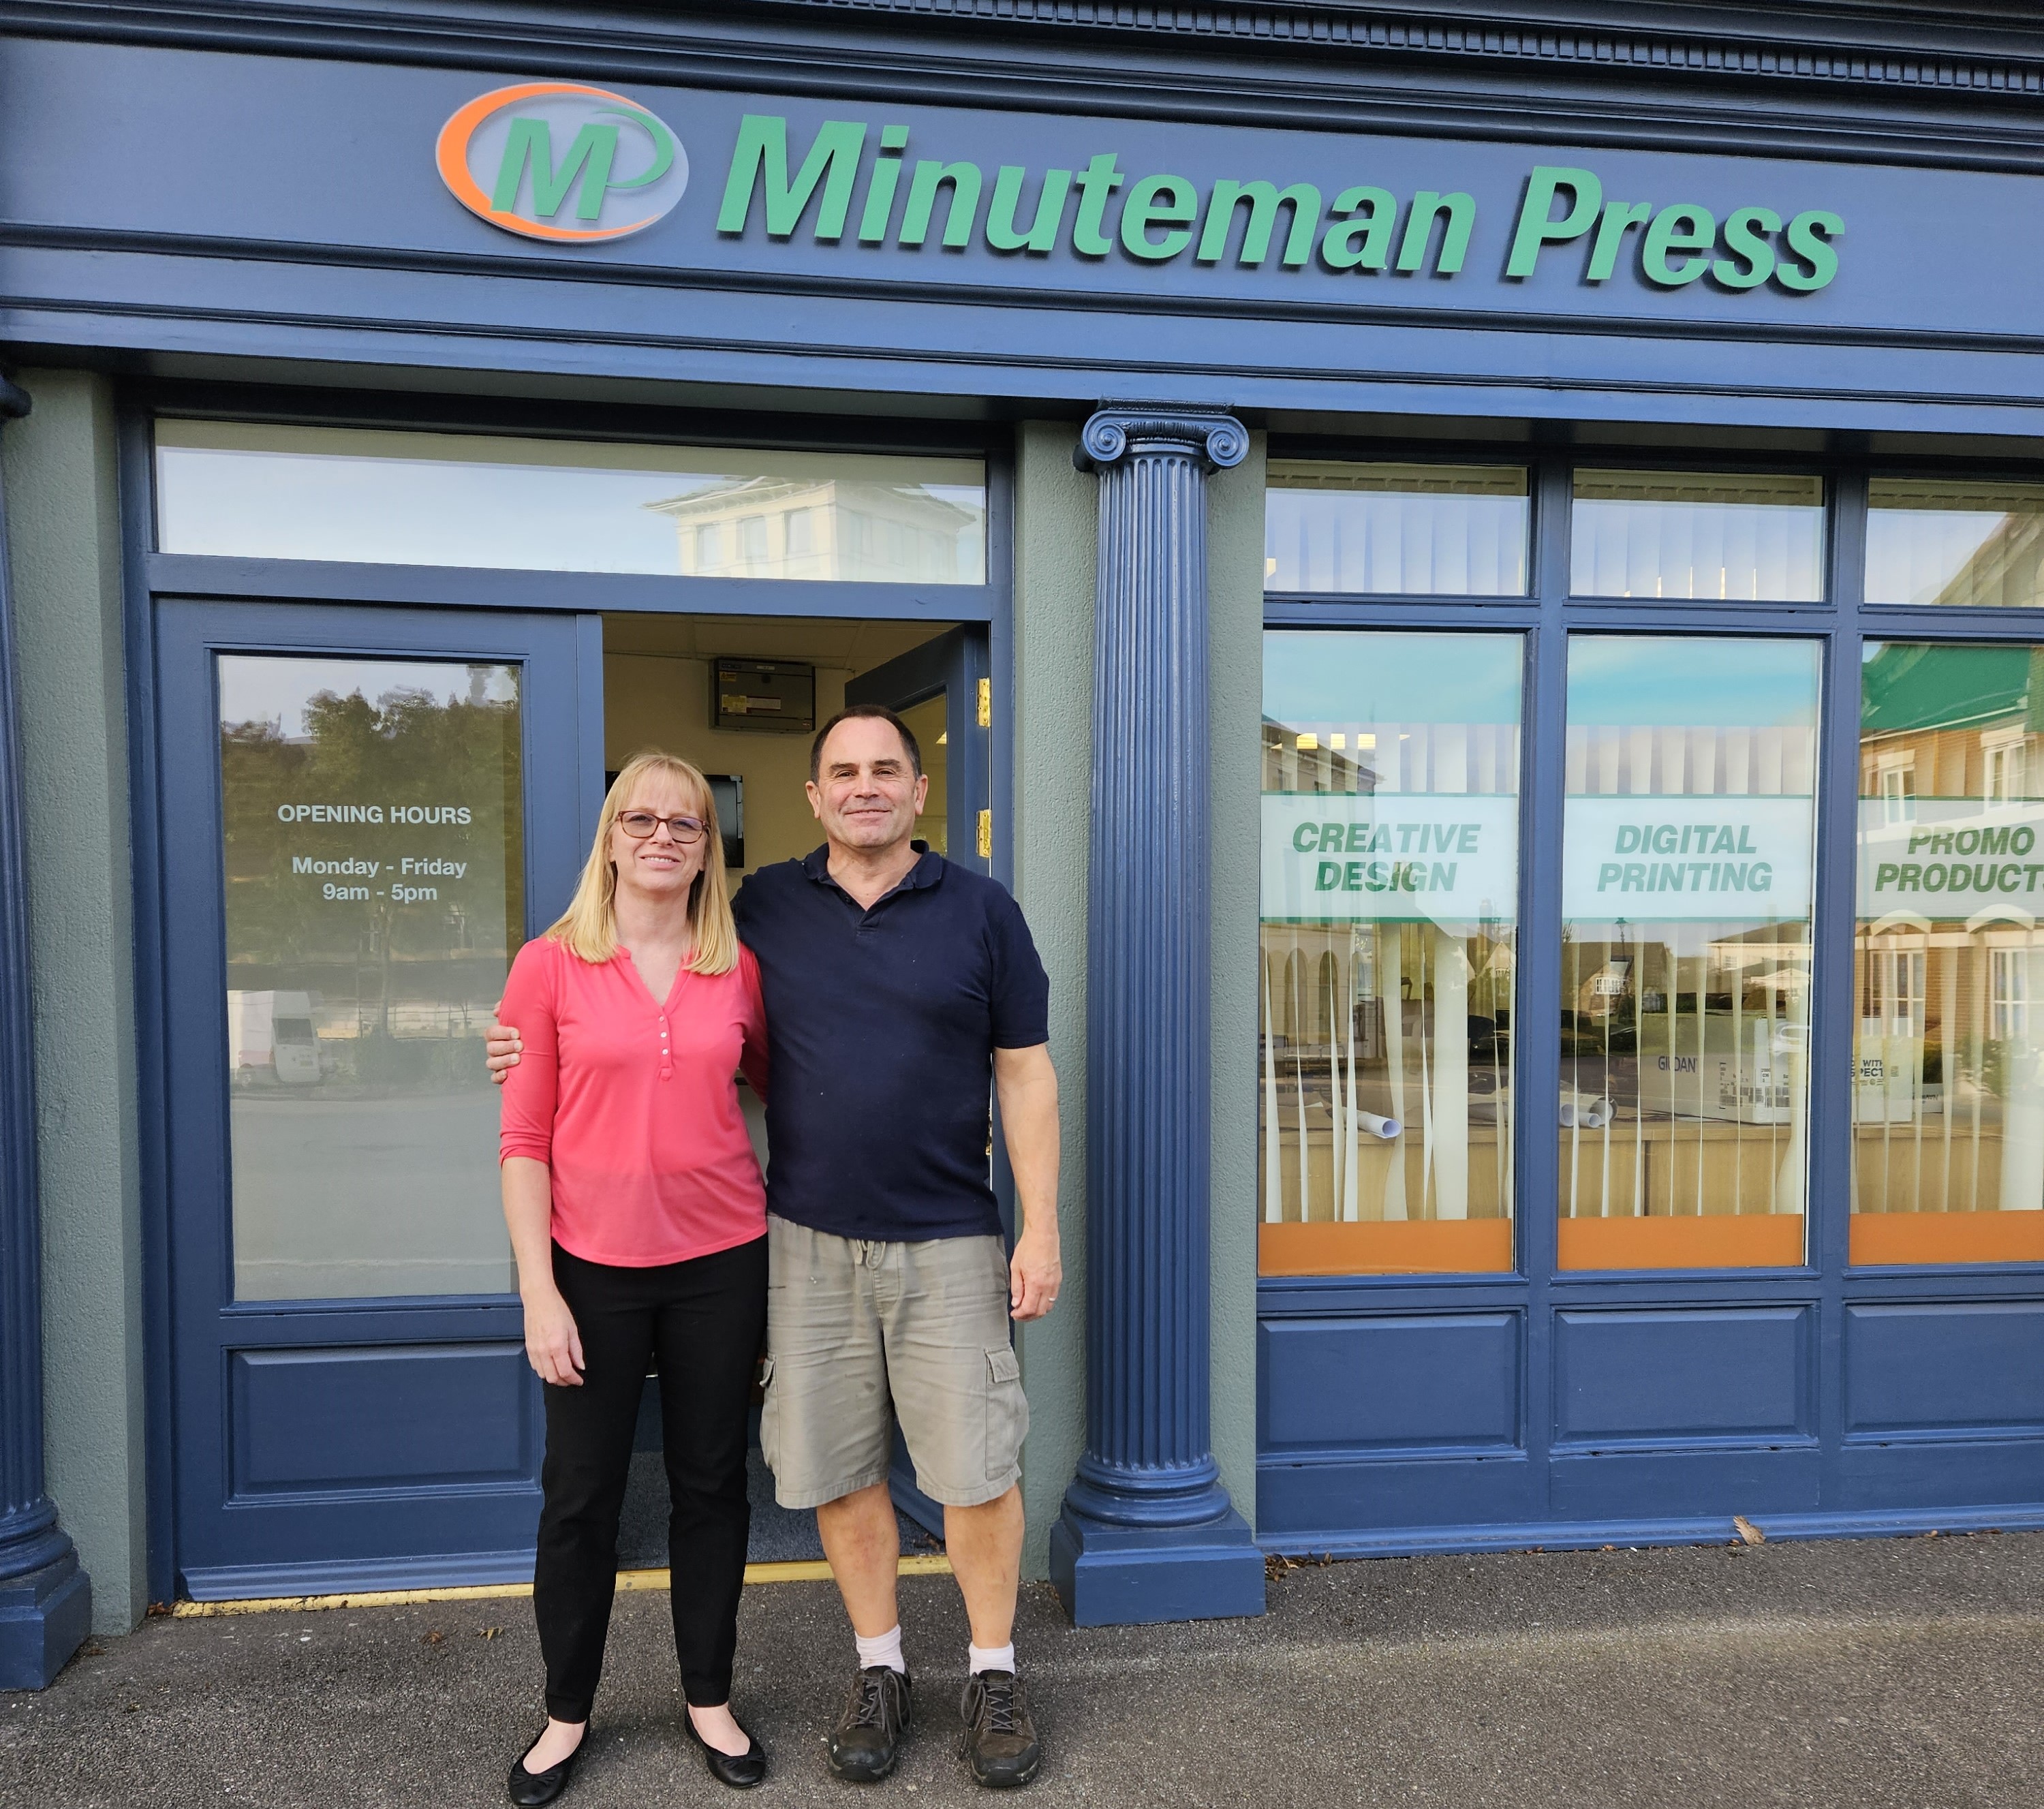 Owners Juanita and David Prince outside their new location for Minuteman Press in Poundbury and Dorchester. https://sellyourprintingbusiness.com